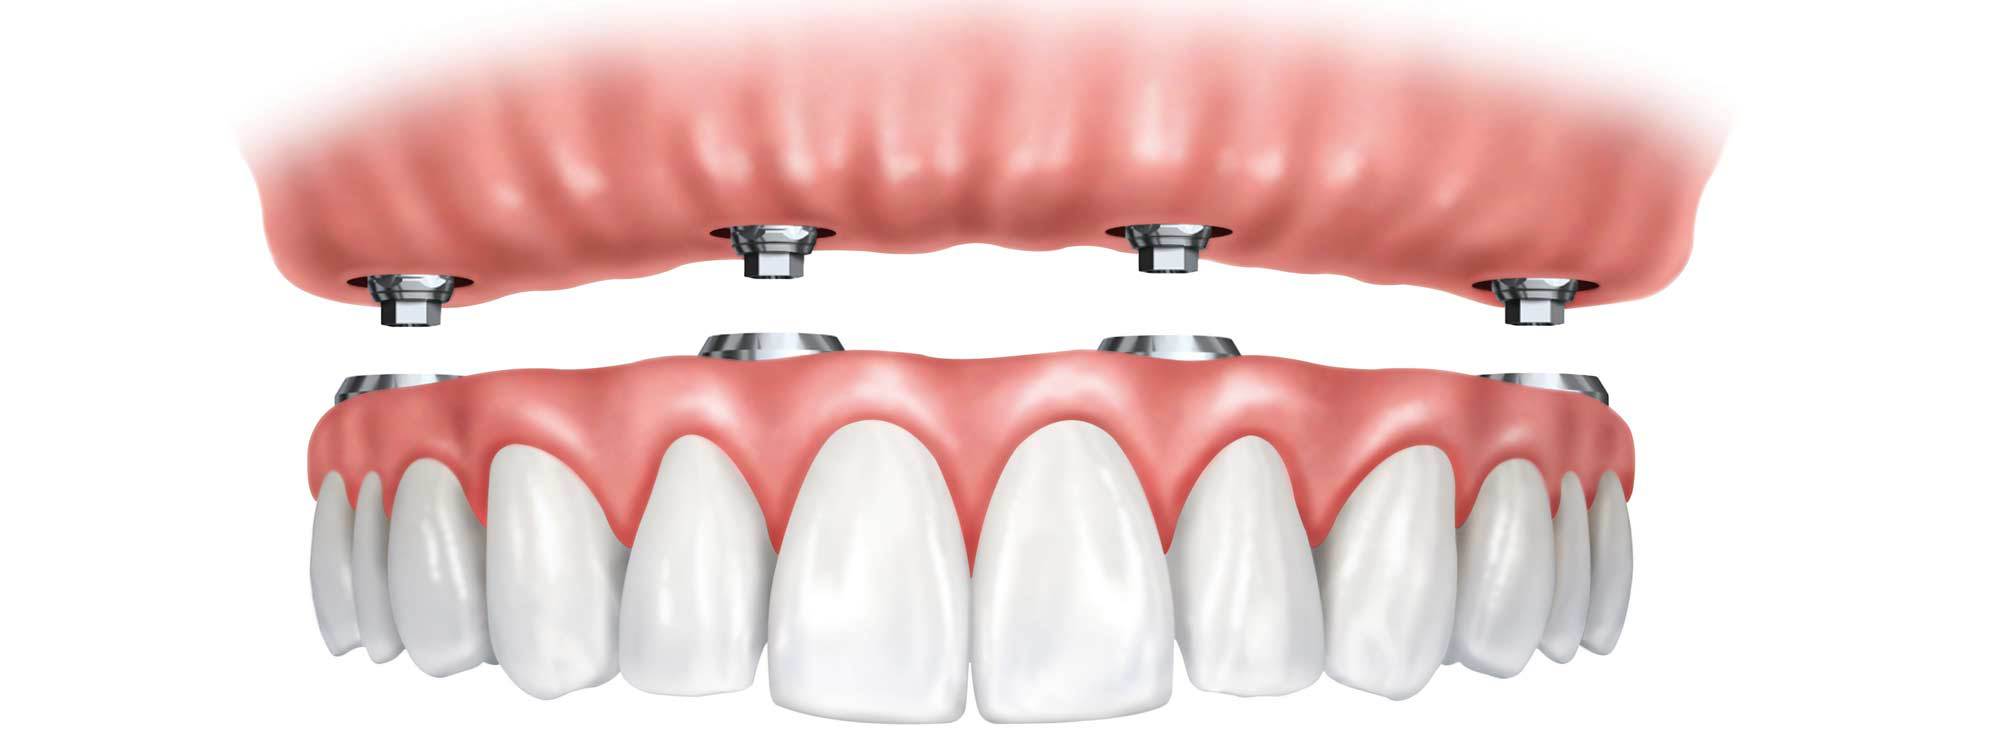 Implant Overdentures by Nassau County Periodontist Dr. Stephanie Sfiroudis DDS, MS